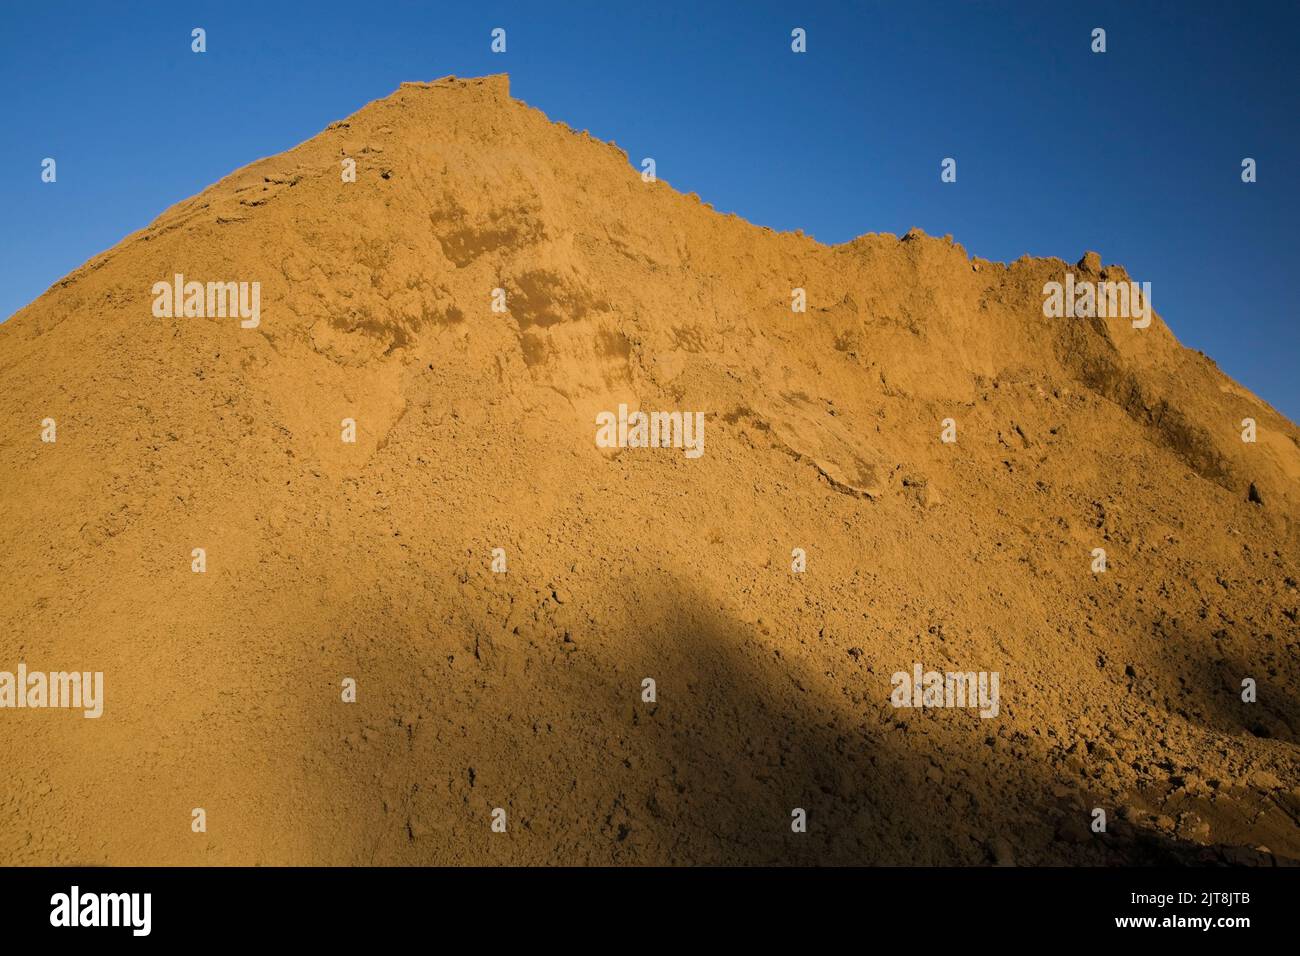 Mound of tan colored sand in a commercial sandpit at sunset. Stock Photo